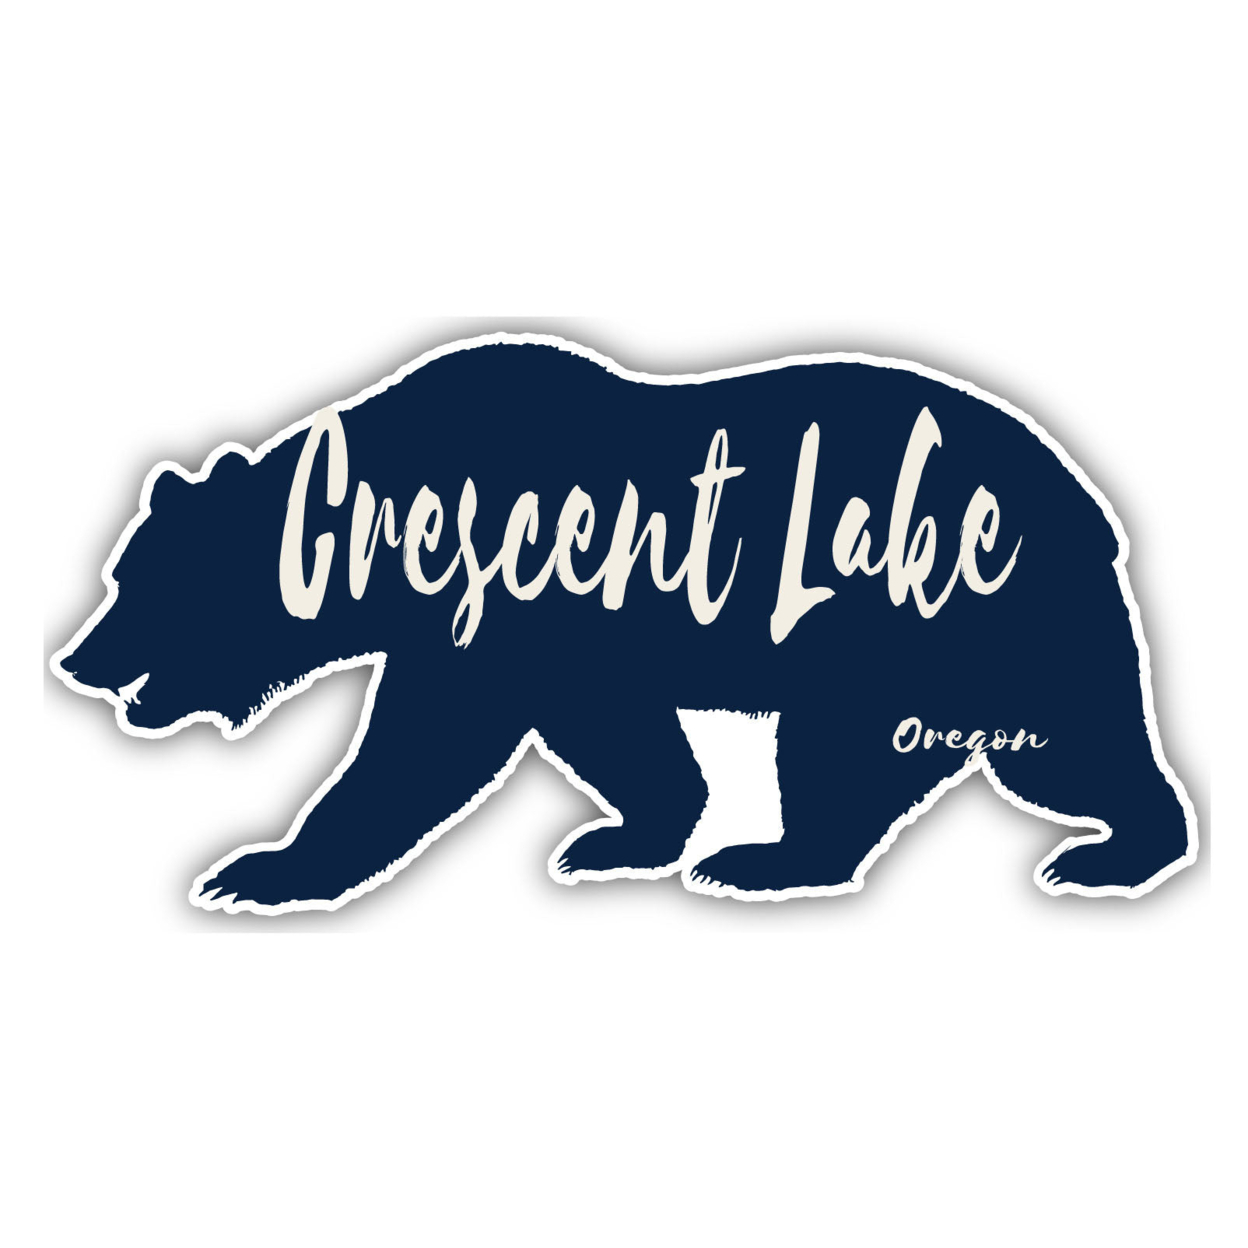 Crescent Lake Oregon Souvenir Decorative Stickers (Choose Theme And Size) - 4-Pack, 4-Inch, Camp Life